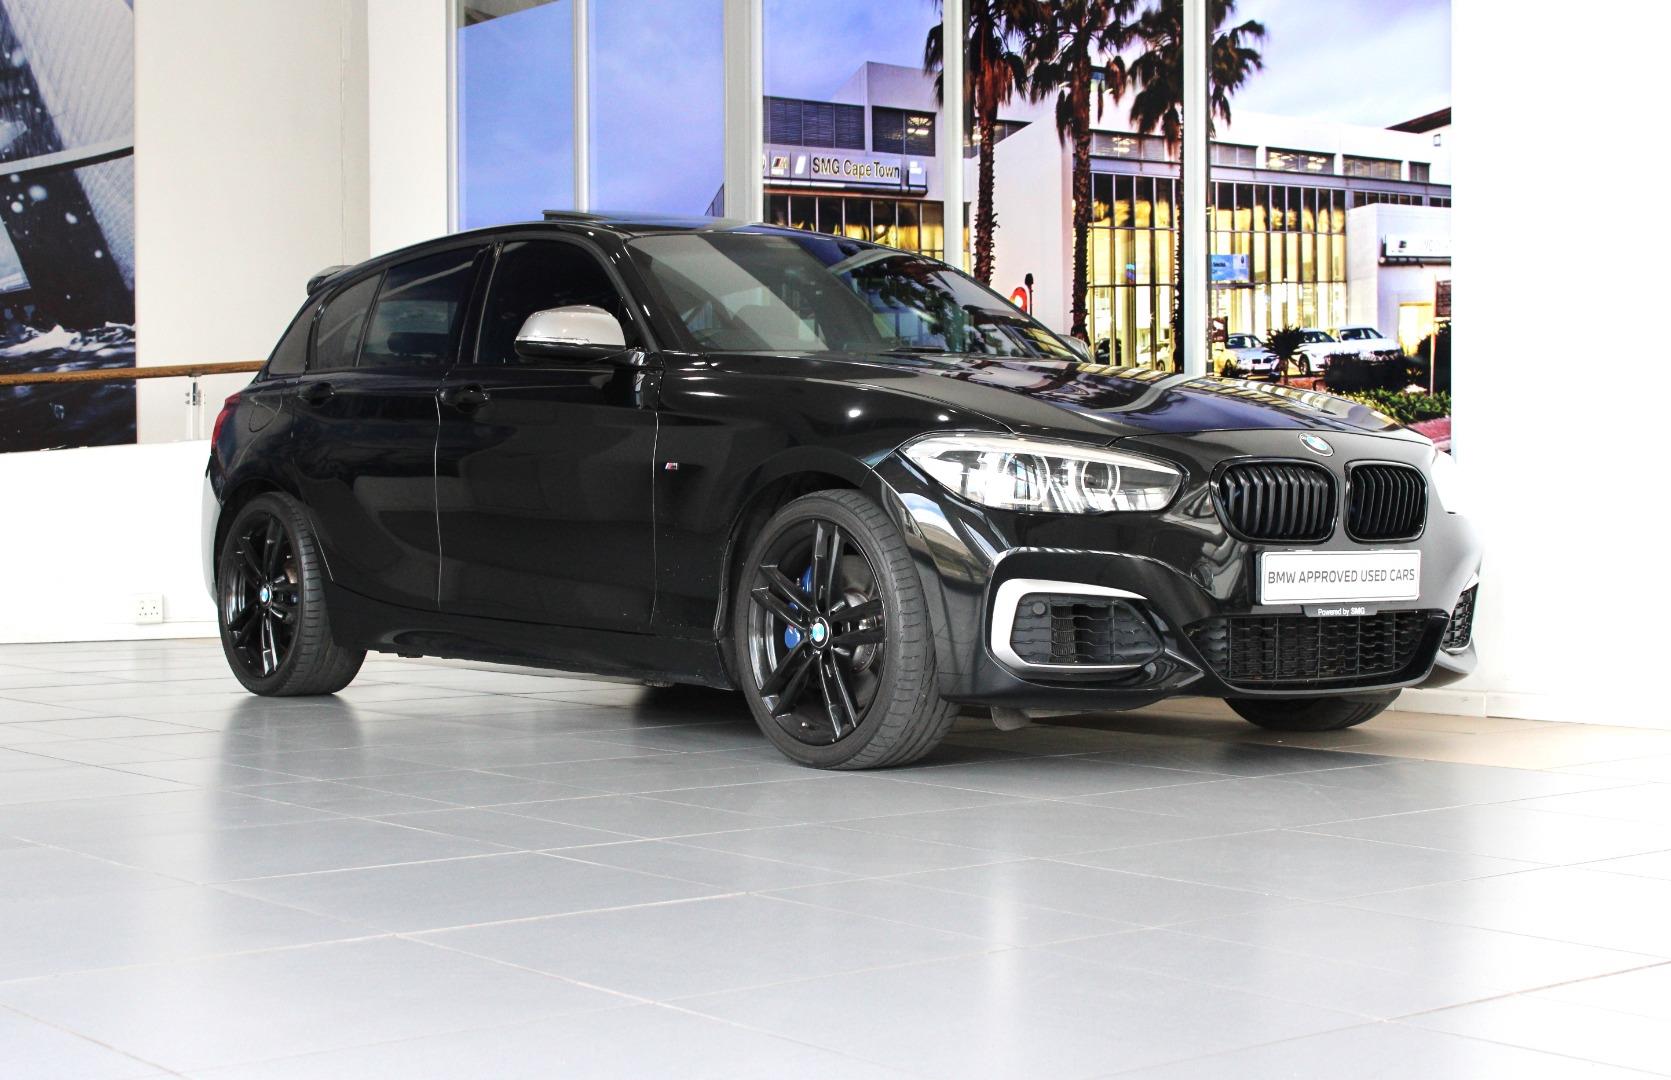 2018 BMW M140i EDITION M SPORT SHADOW 5DR AT (F20)  for sale - SMG12|USED|115212